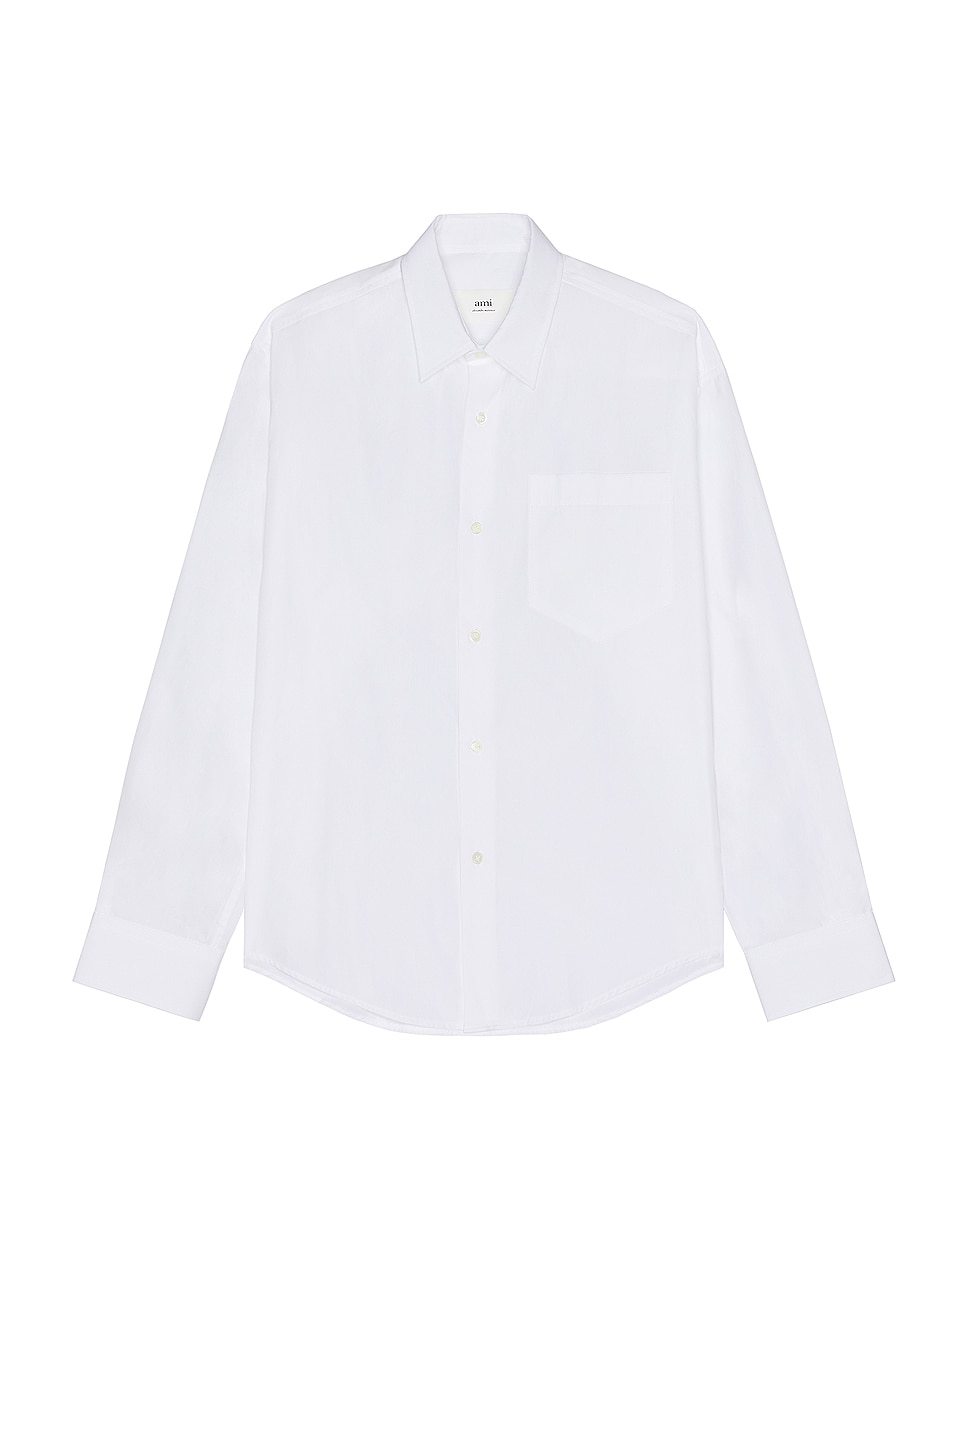 Image 1 of ami Boxy Fit Shirt in White